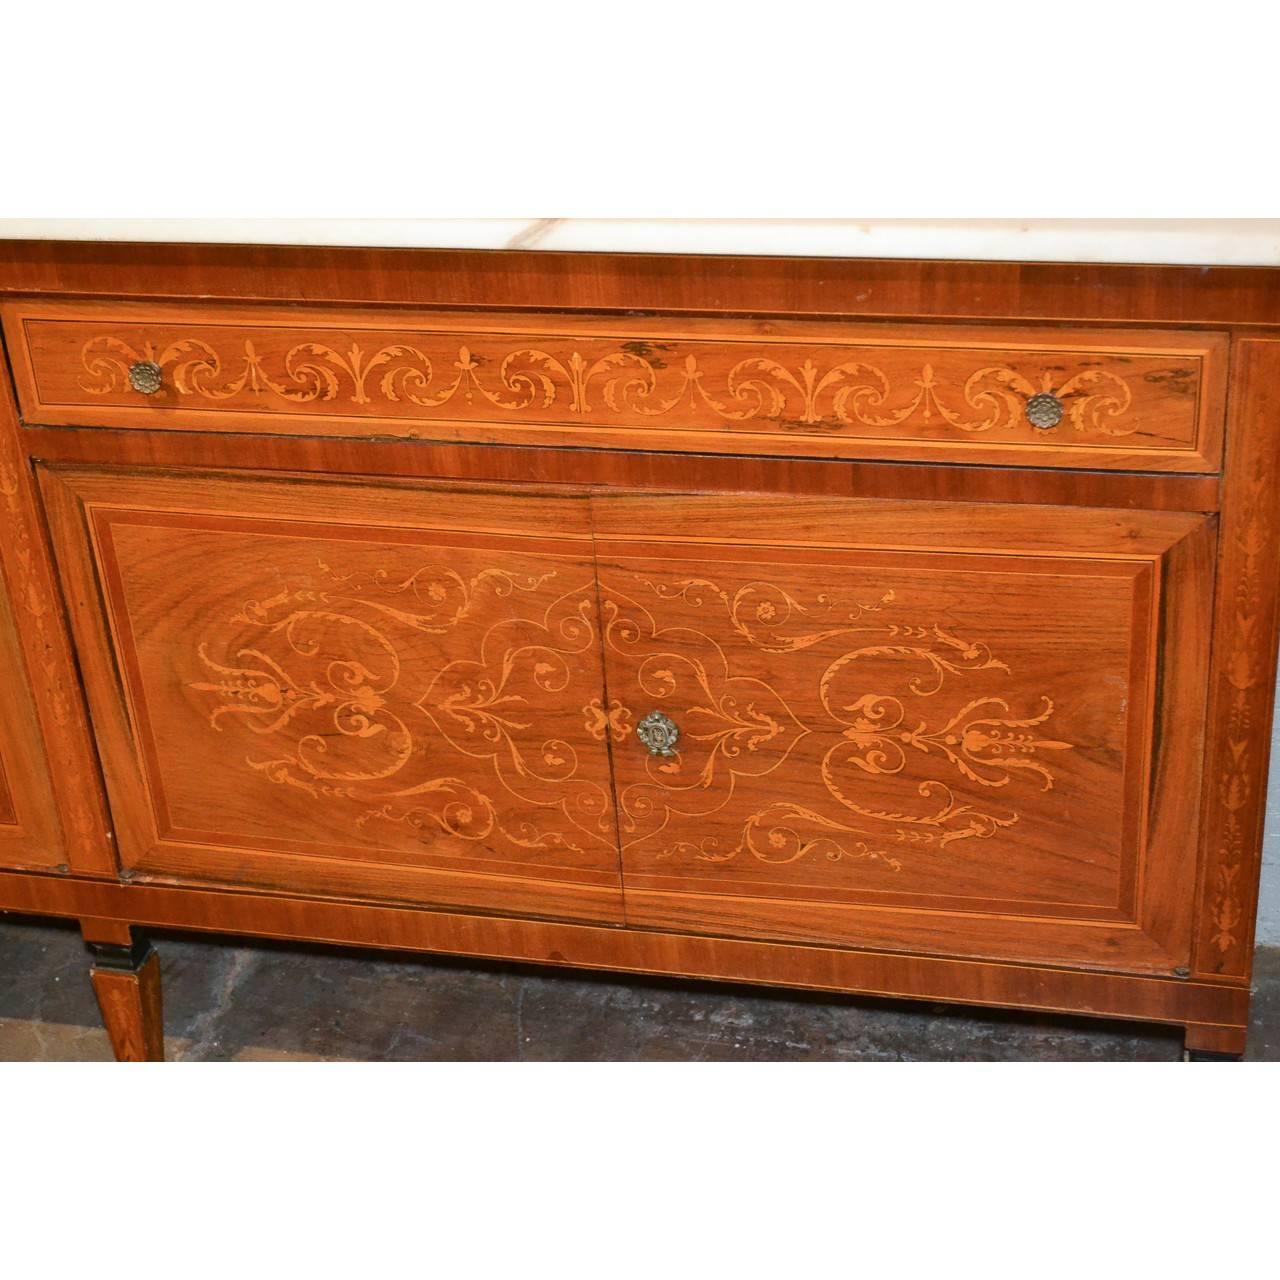 Fine quality early 20th century Italian mahogany credenza or sideboard with a white marble top. Fitted with two long drawers and two large cupboards. Exquisite satinwood marquetry inlays overall of stylized vines, leaves, and fleur de lis. The